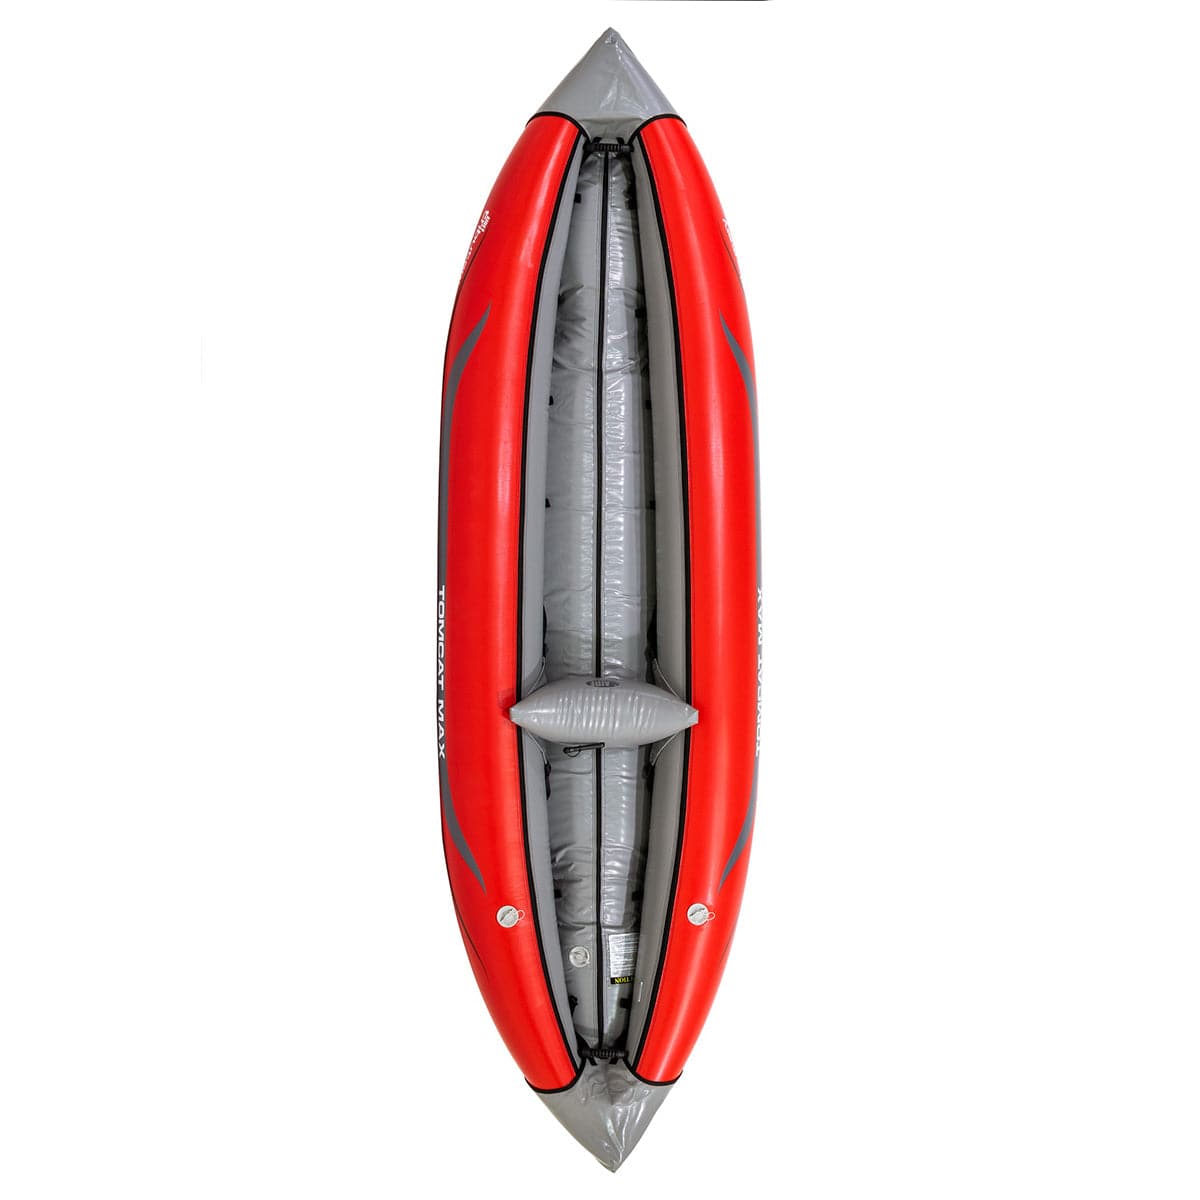 Featuring the Tributary Tomcat Max ducky, inflatable kayak manufactured by AIRE shown here from a second angle.